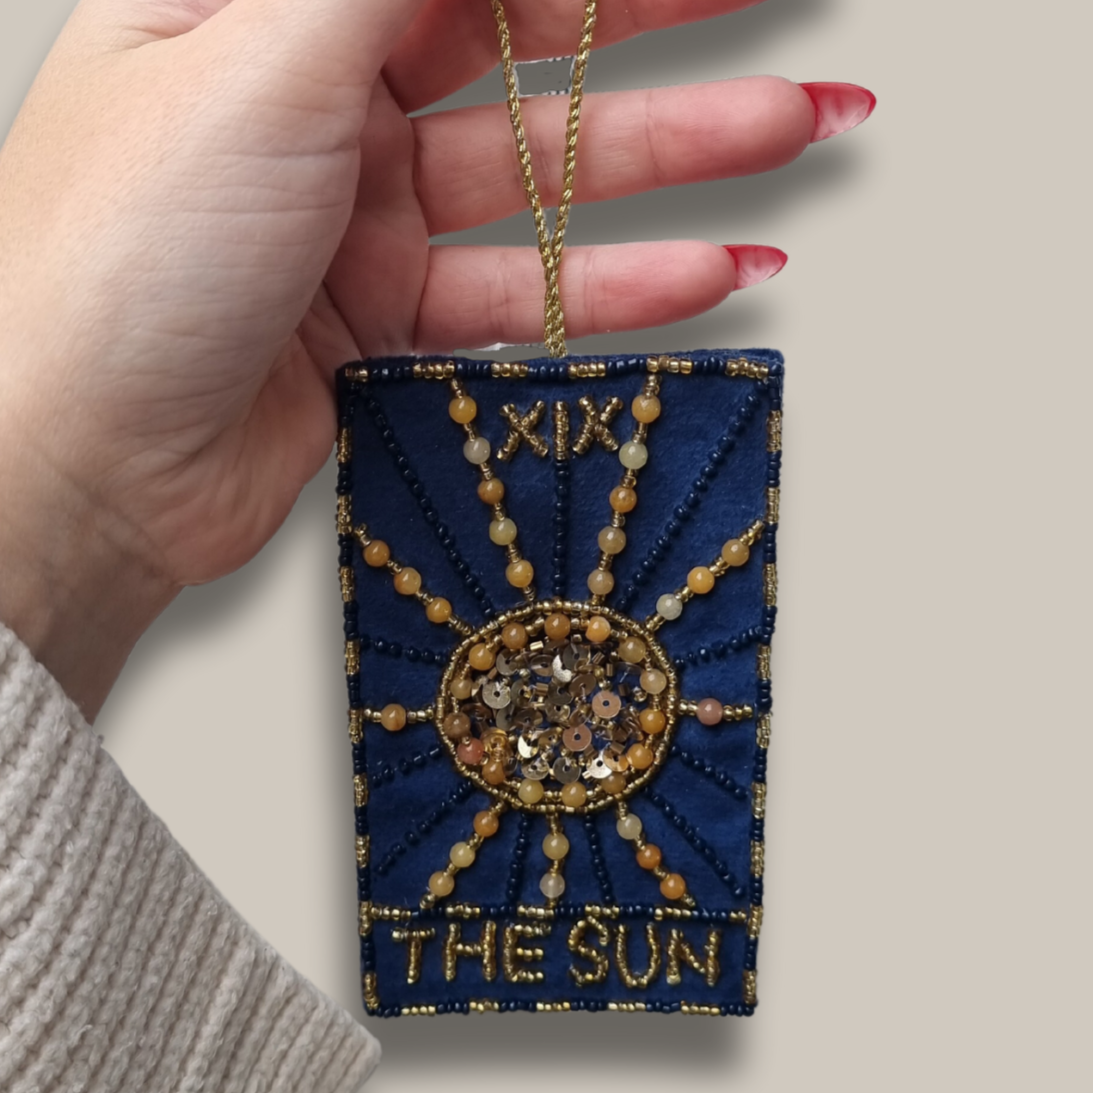 The Sun Tarot Hanging  Decoration With Genuine Citrine Crystals